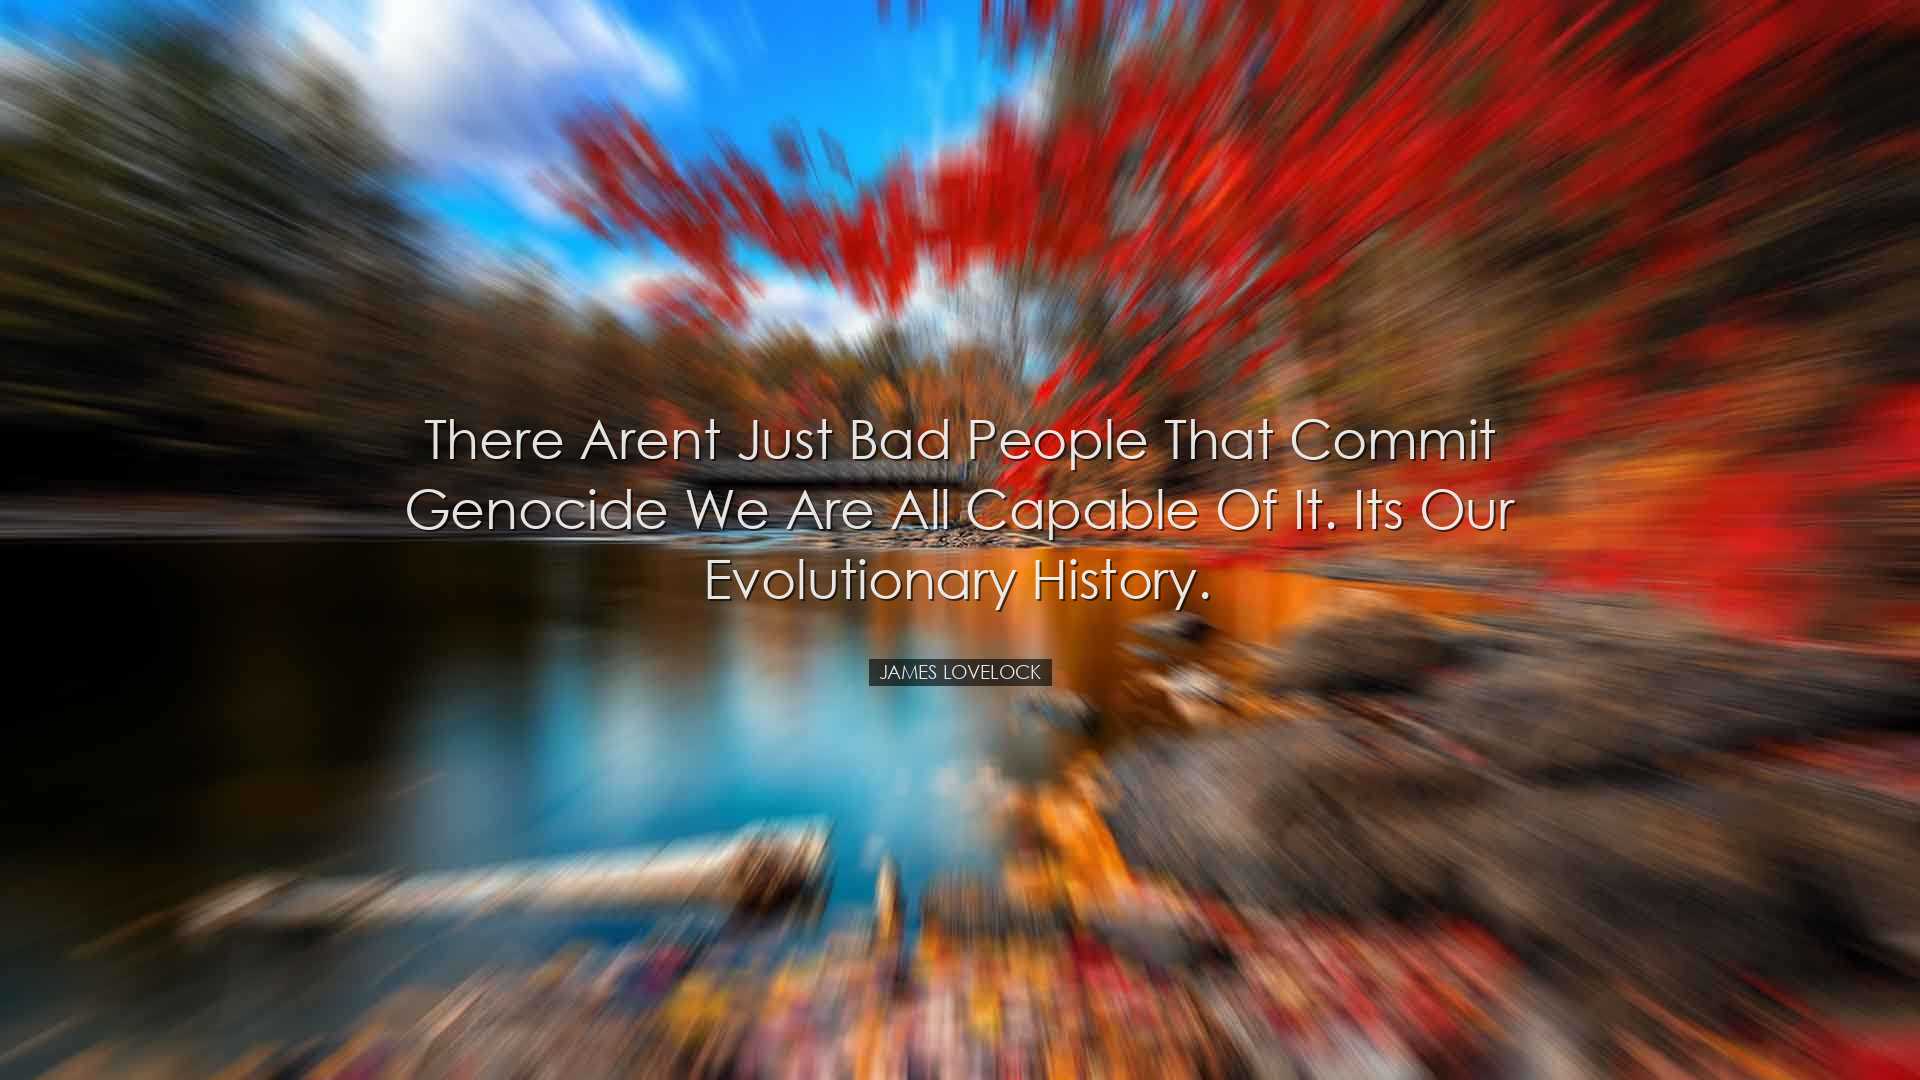 There arent just bad people that commit genocide we are all capabl